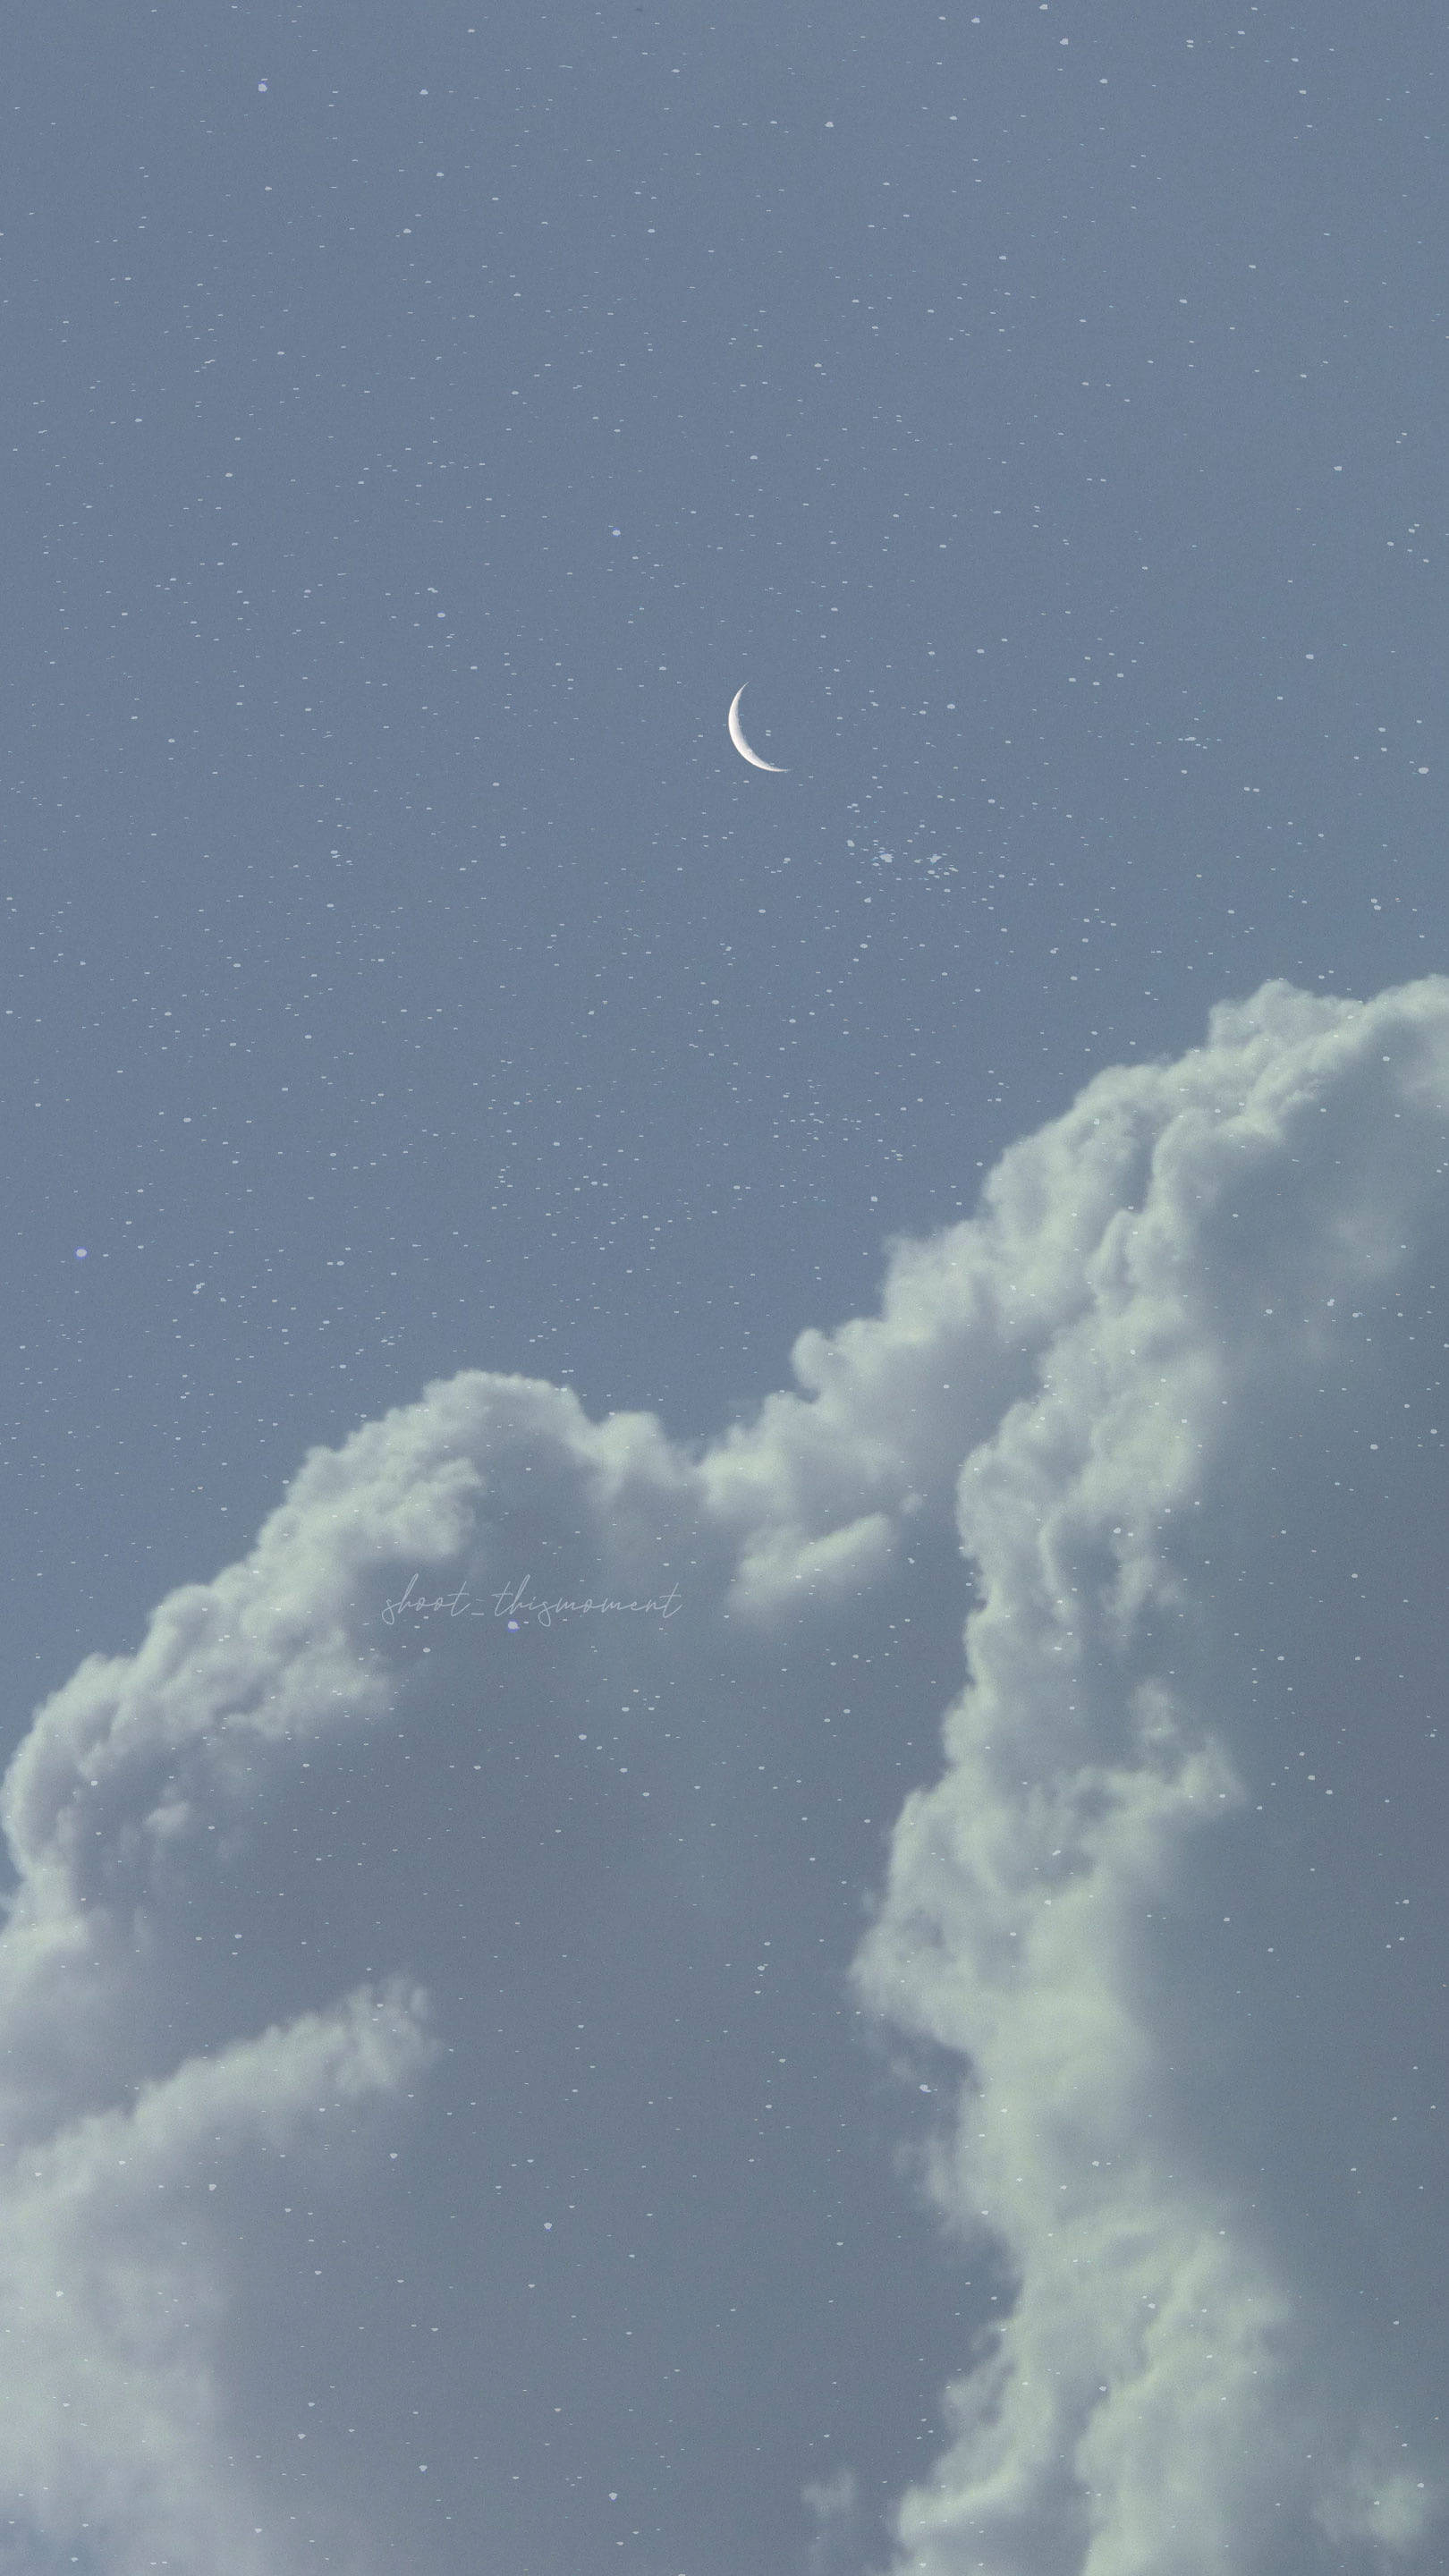 Aesthetic phone wallpaper of a blue sky with white clouds and a crescent moon. - Sky, magic